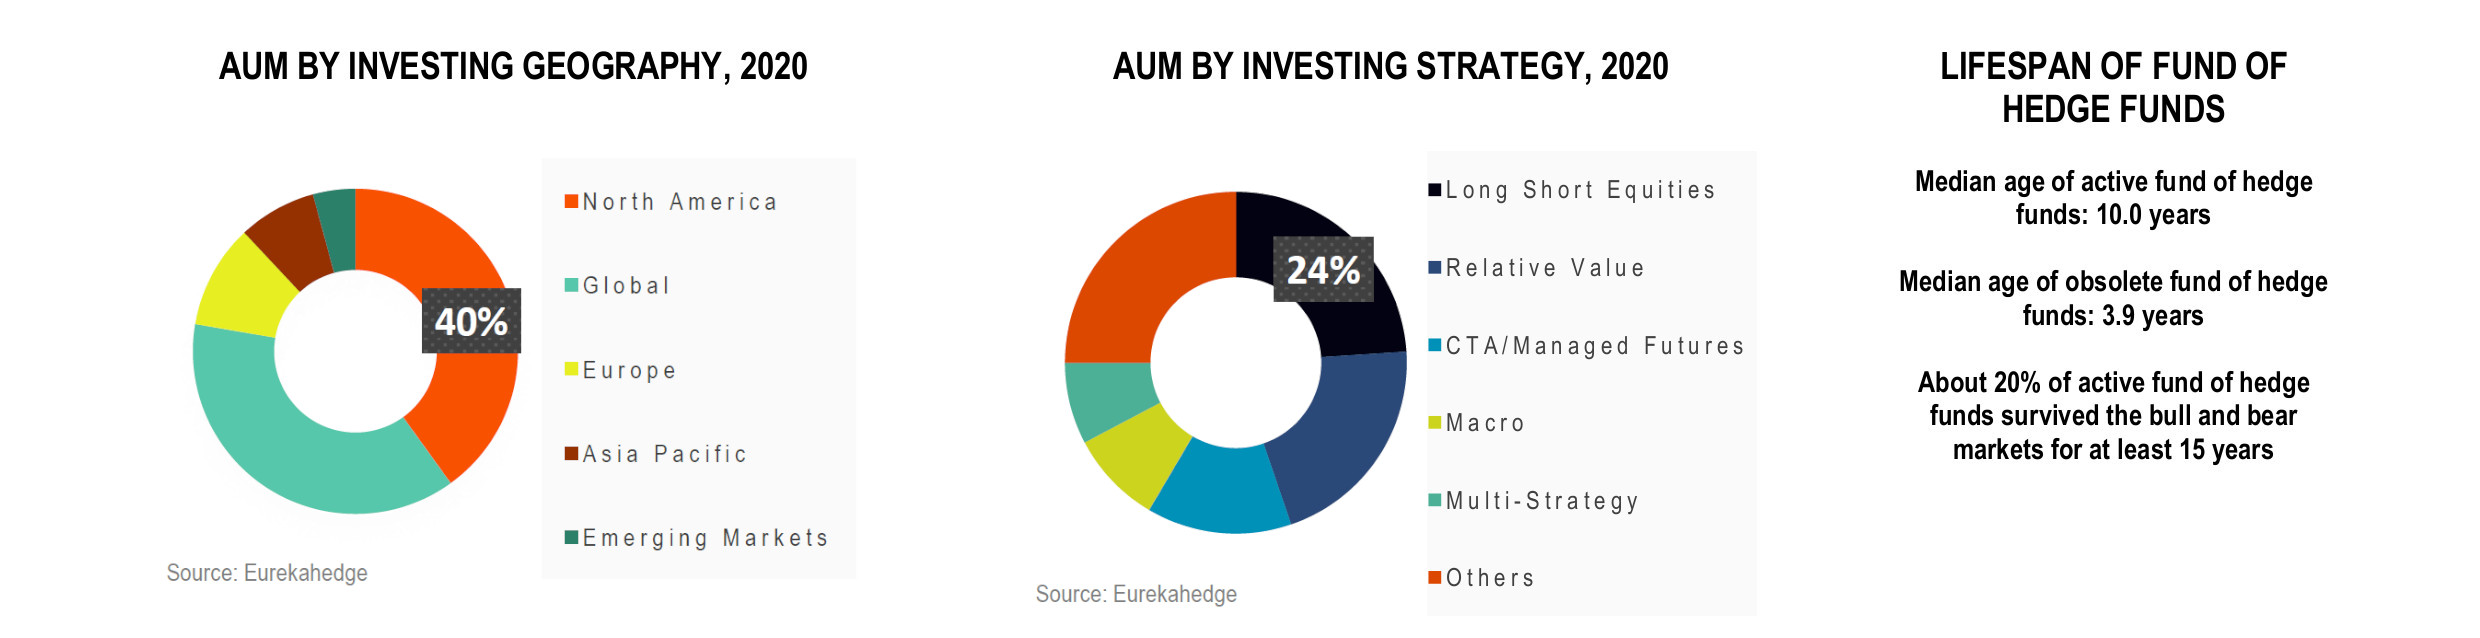 Funds of Hedge Funds Infographic June 2020 - AUM by investing geography and AUM by strategy